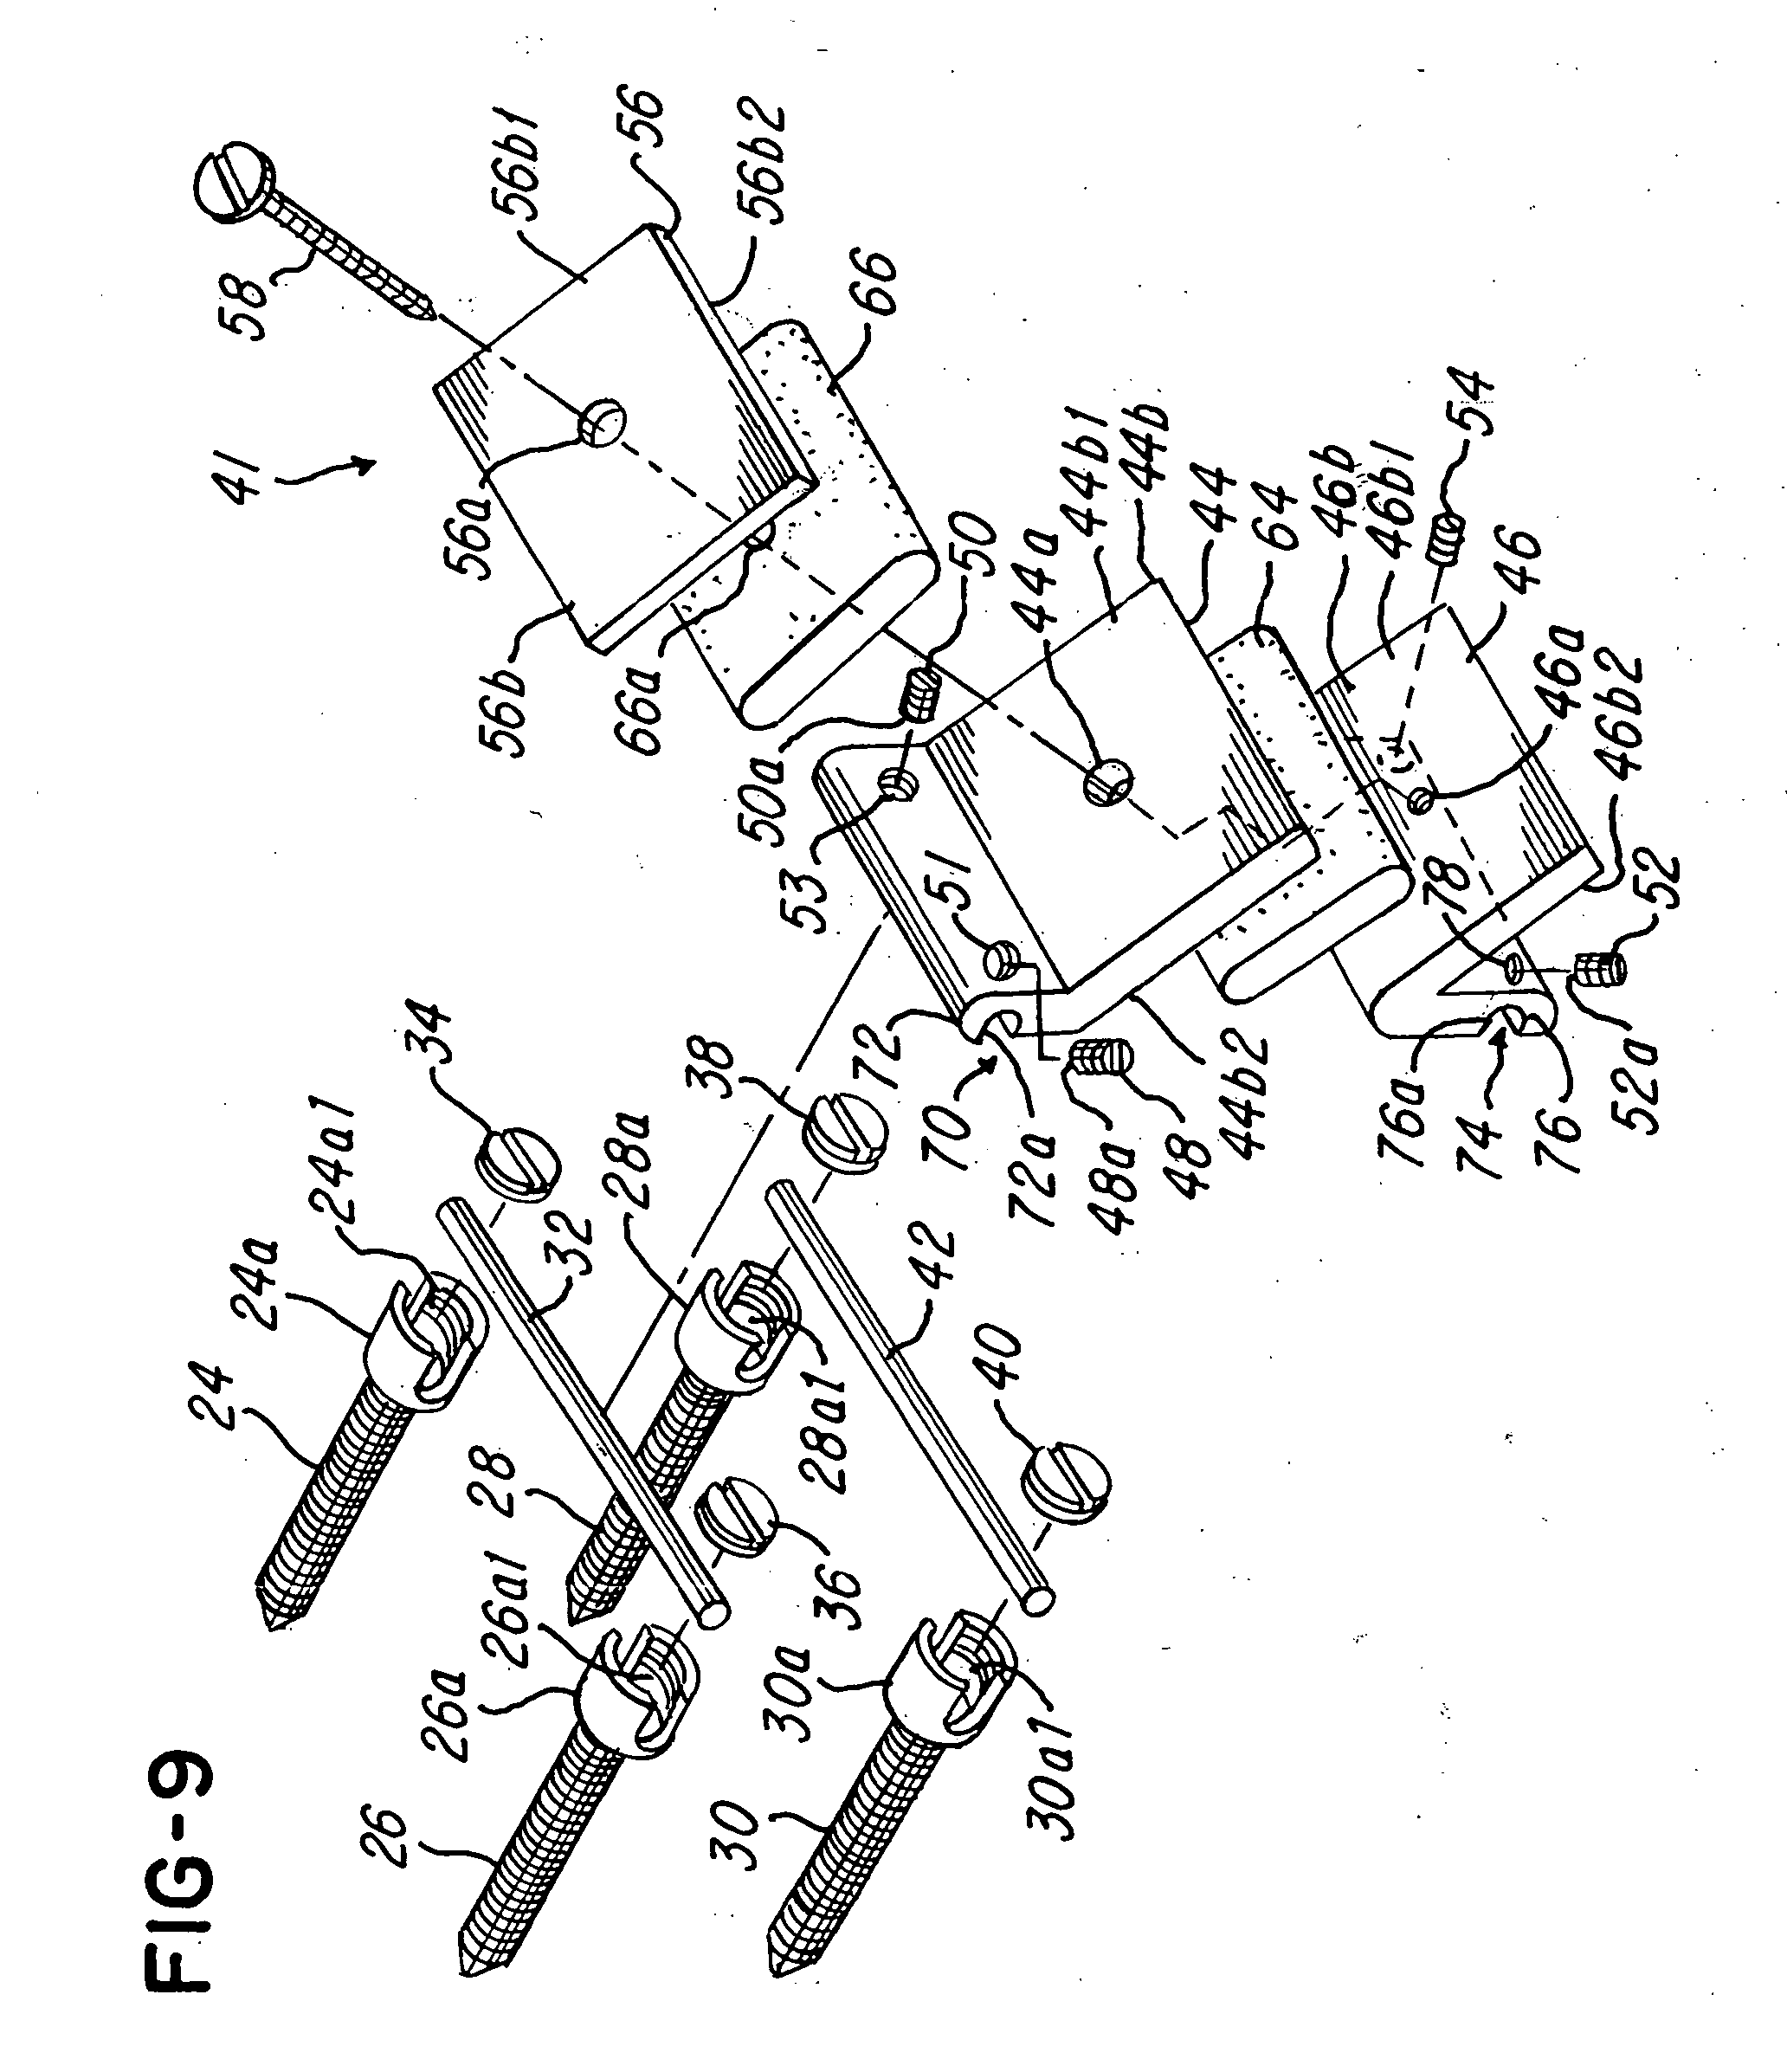 Disk augmentation system and method